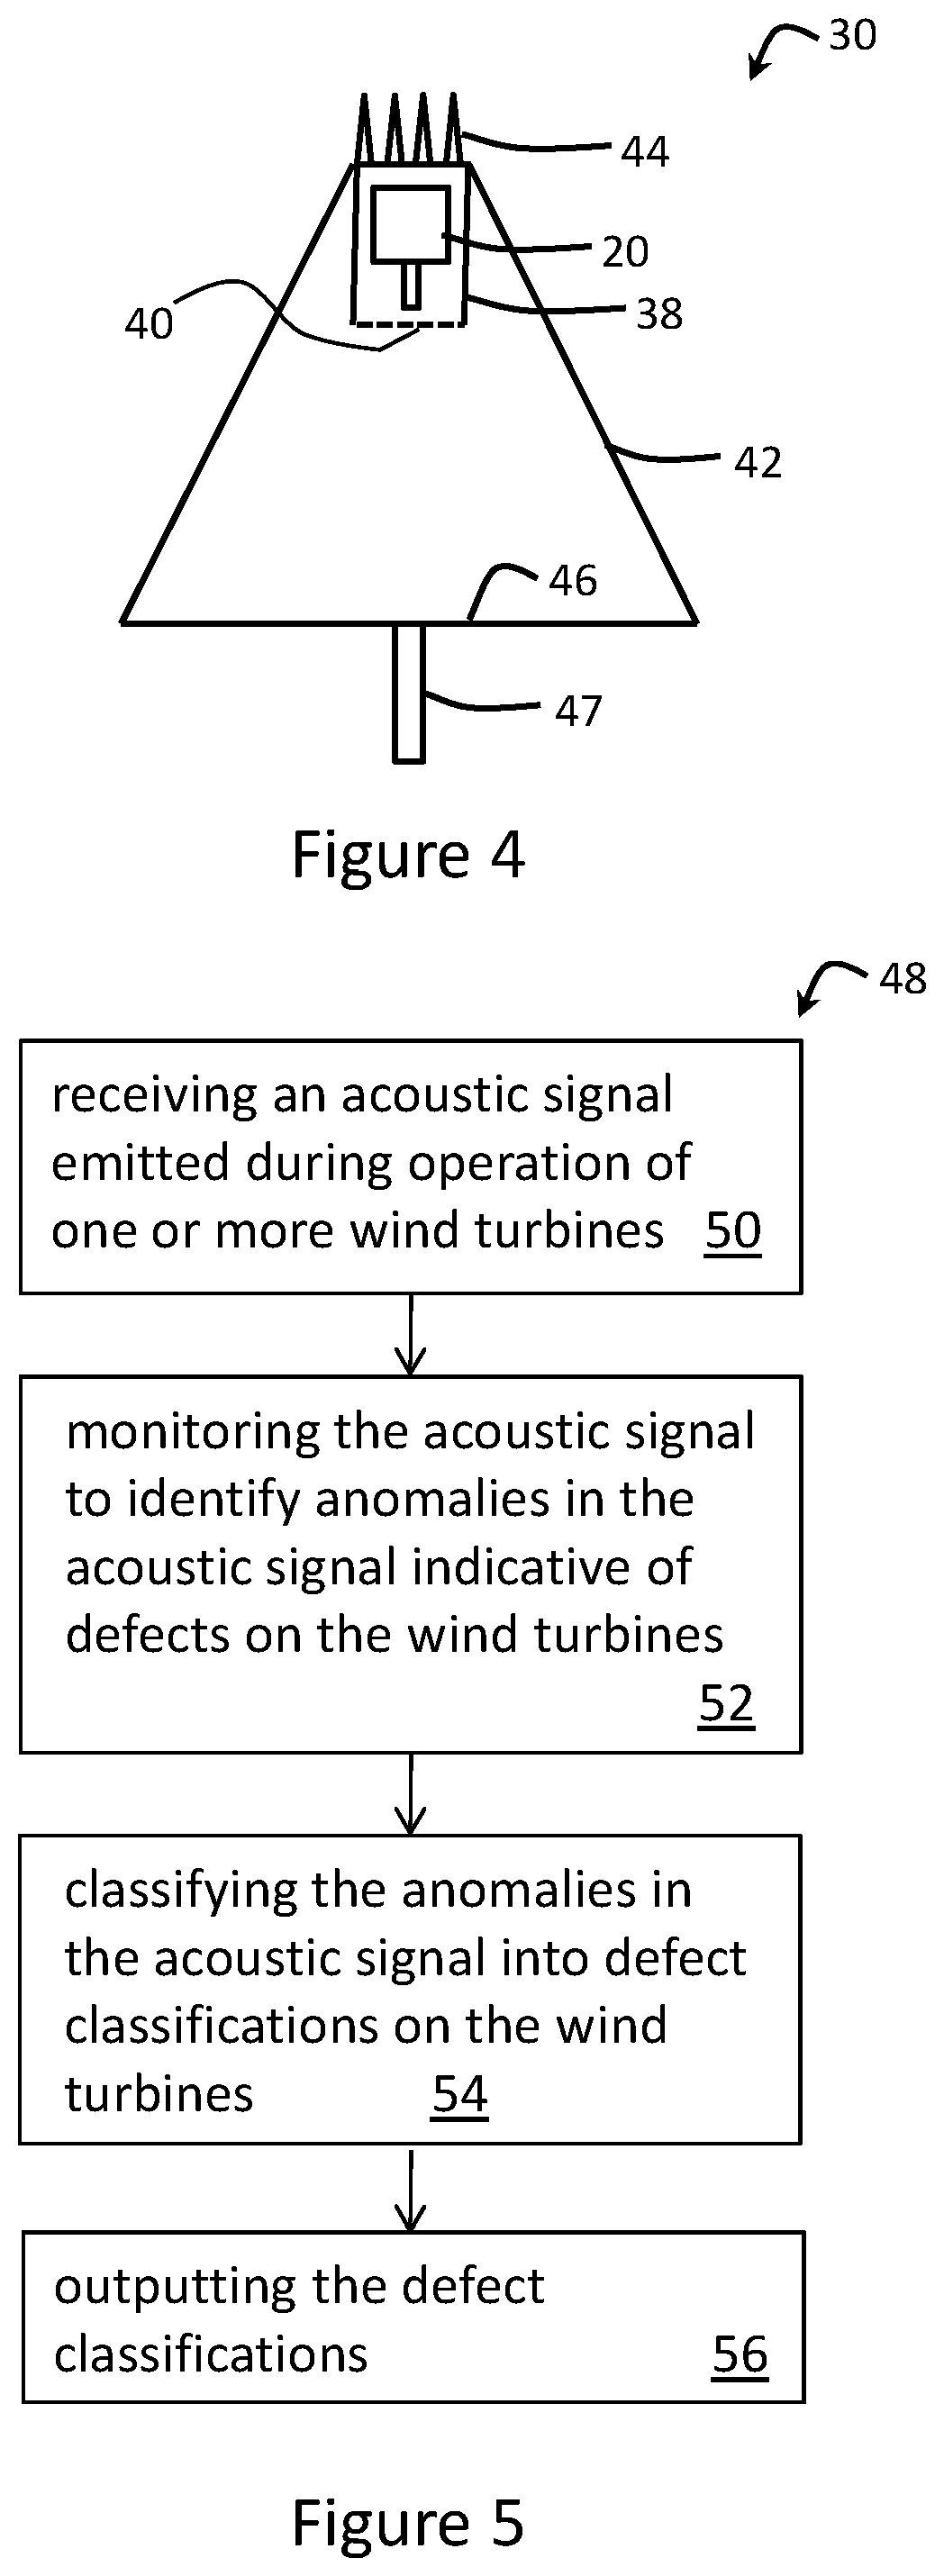 An Apparatus and Method of Detecting Anomalies in an Acoustic Signal